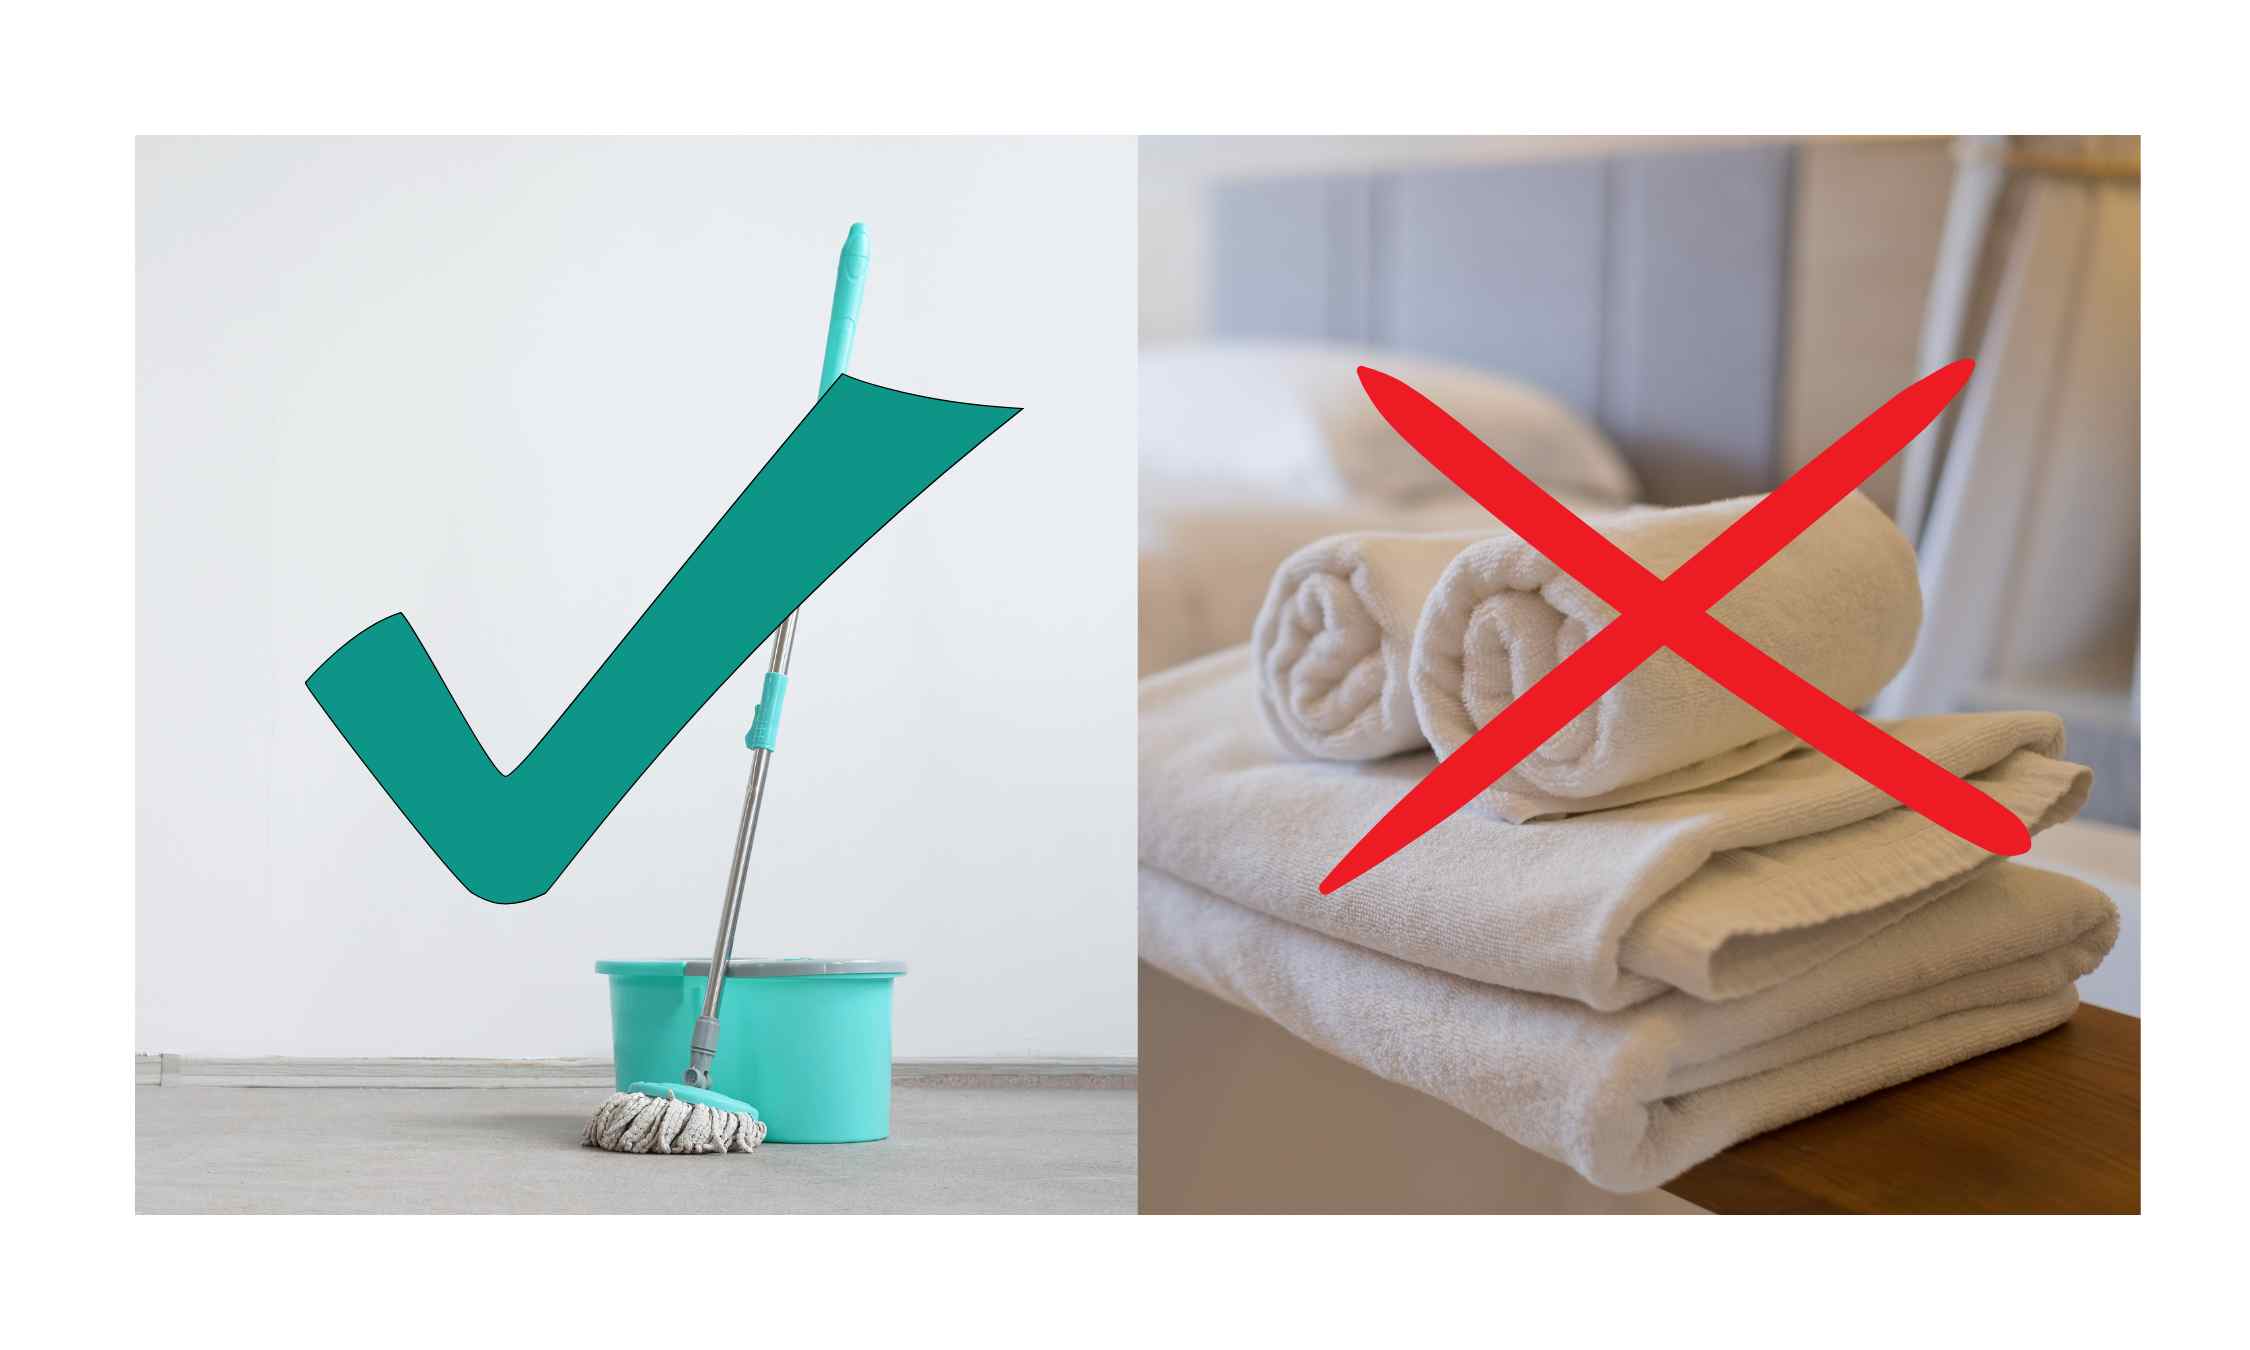 This service covers the cost of the Check Out Clean (excluding cleaning of the oven & BBQ or mould removal), with no additional charges for linen/towels, as owners are asked to remake beds with the carefully stripped linen upon arrival and leave bath towels and bathroom packs untouched. Owners are encouraged to utilise the provided supplies.